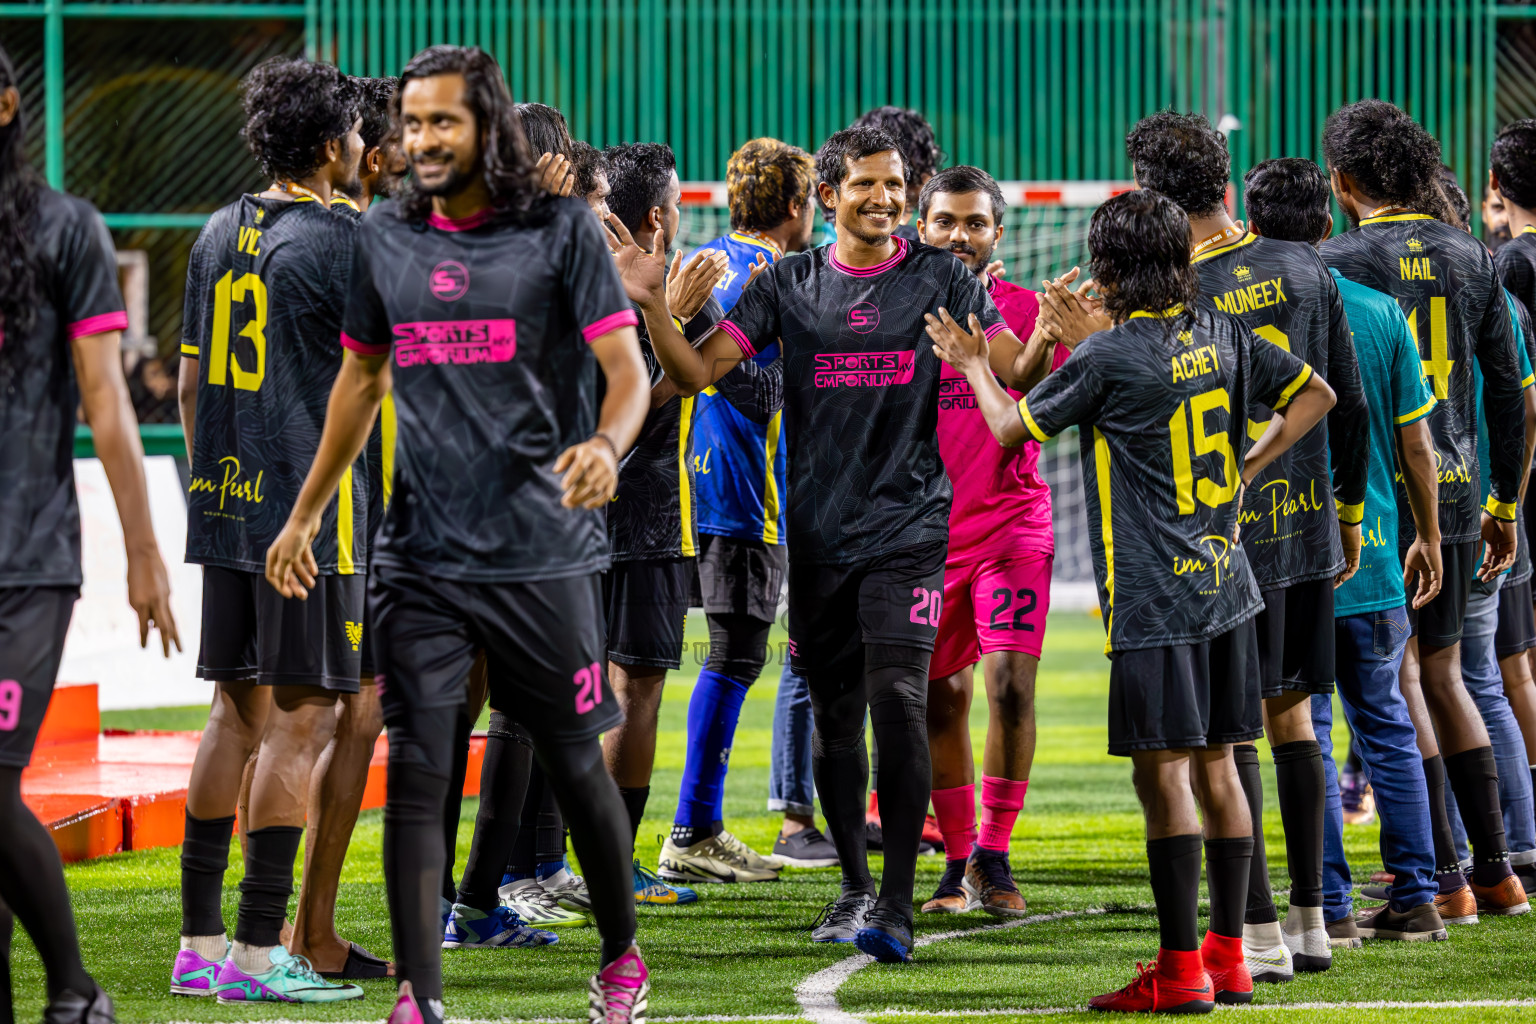 JJ Sports Club vs RDL in Finals of BG Futsal Challenge 2024 was held on Thursday , 4th April 2024, in Male', Maldives Photos: Ismail Thoriq / images.mv